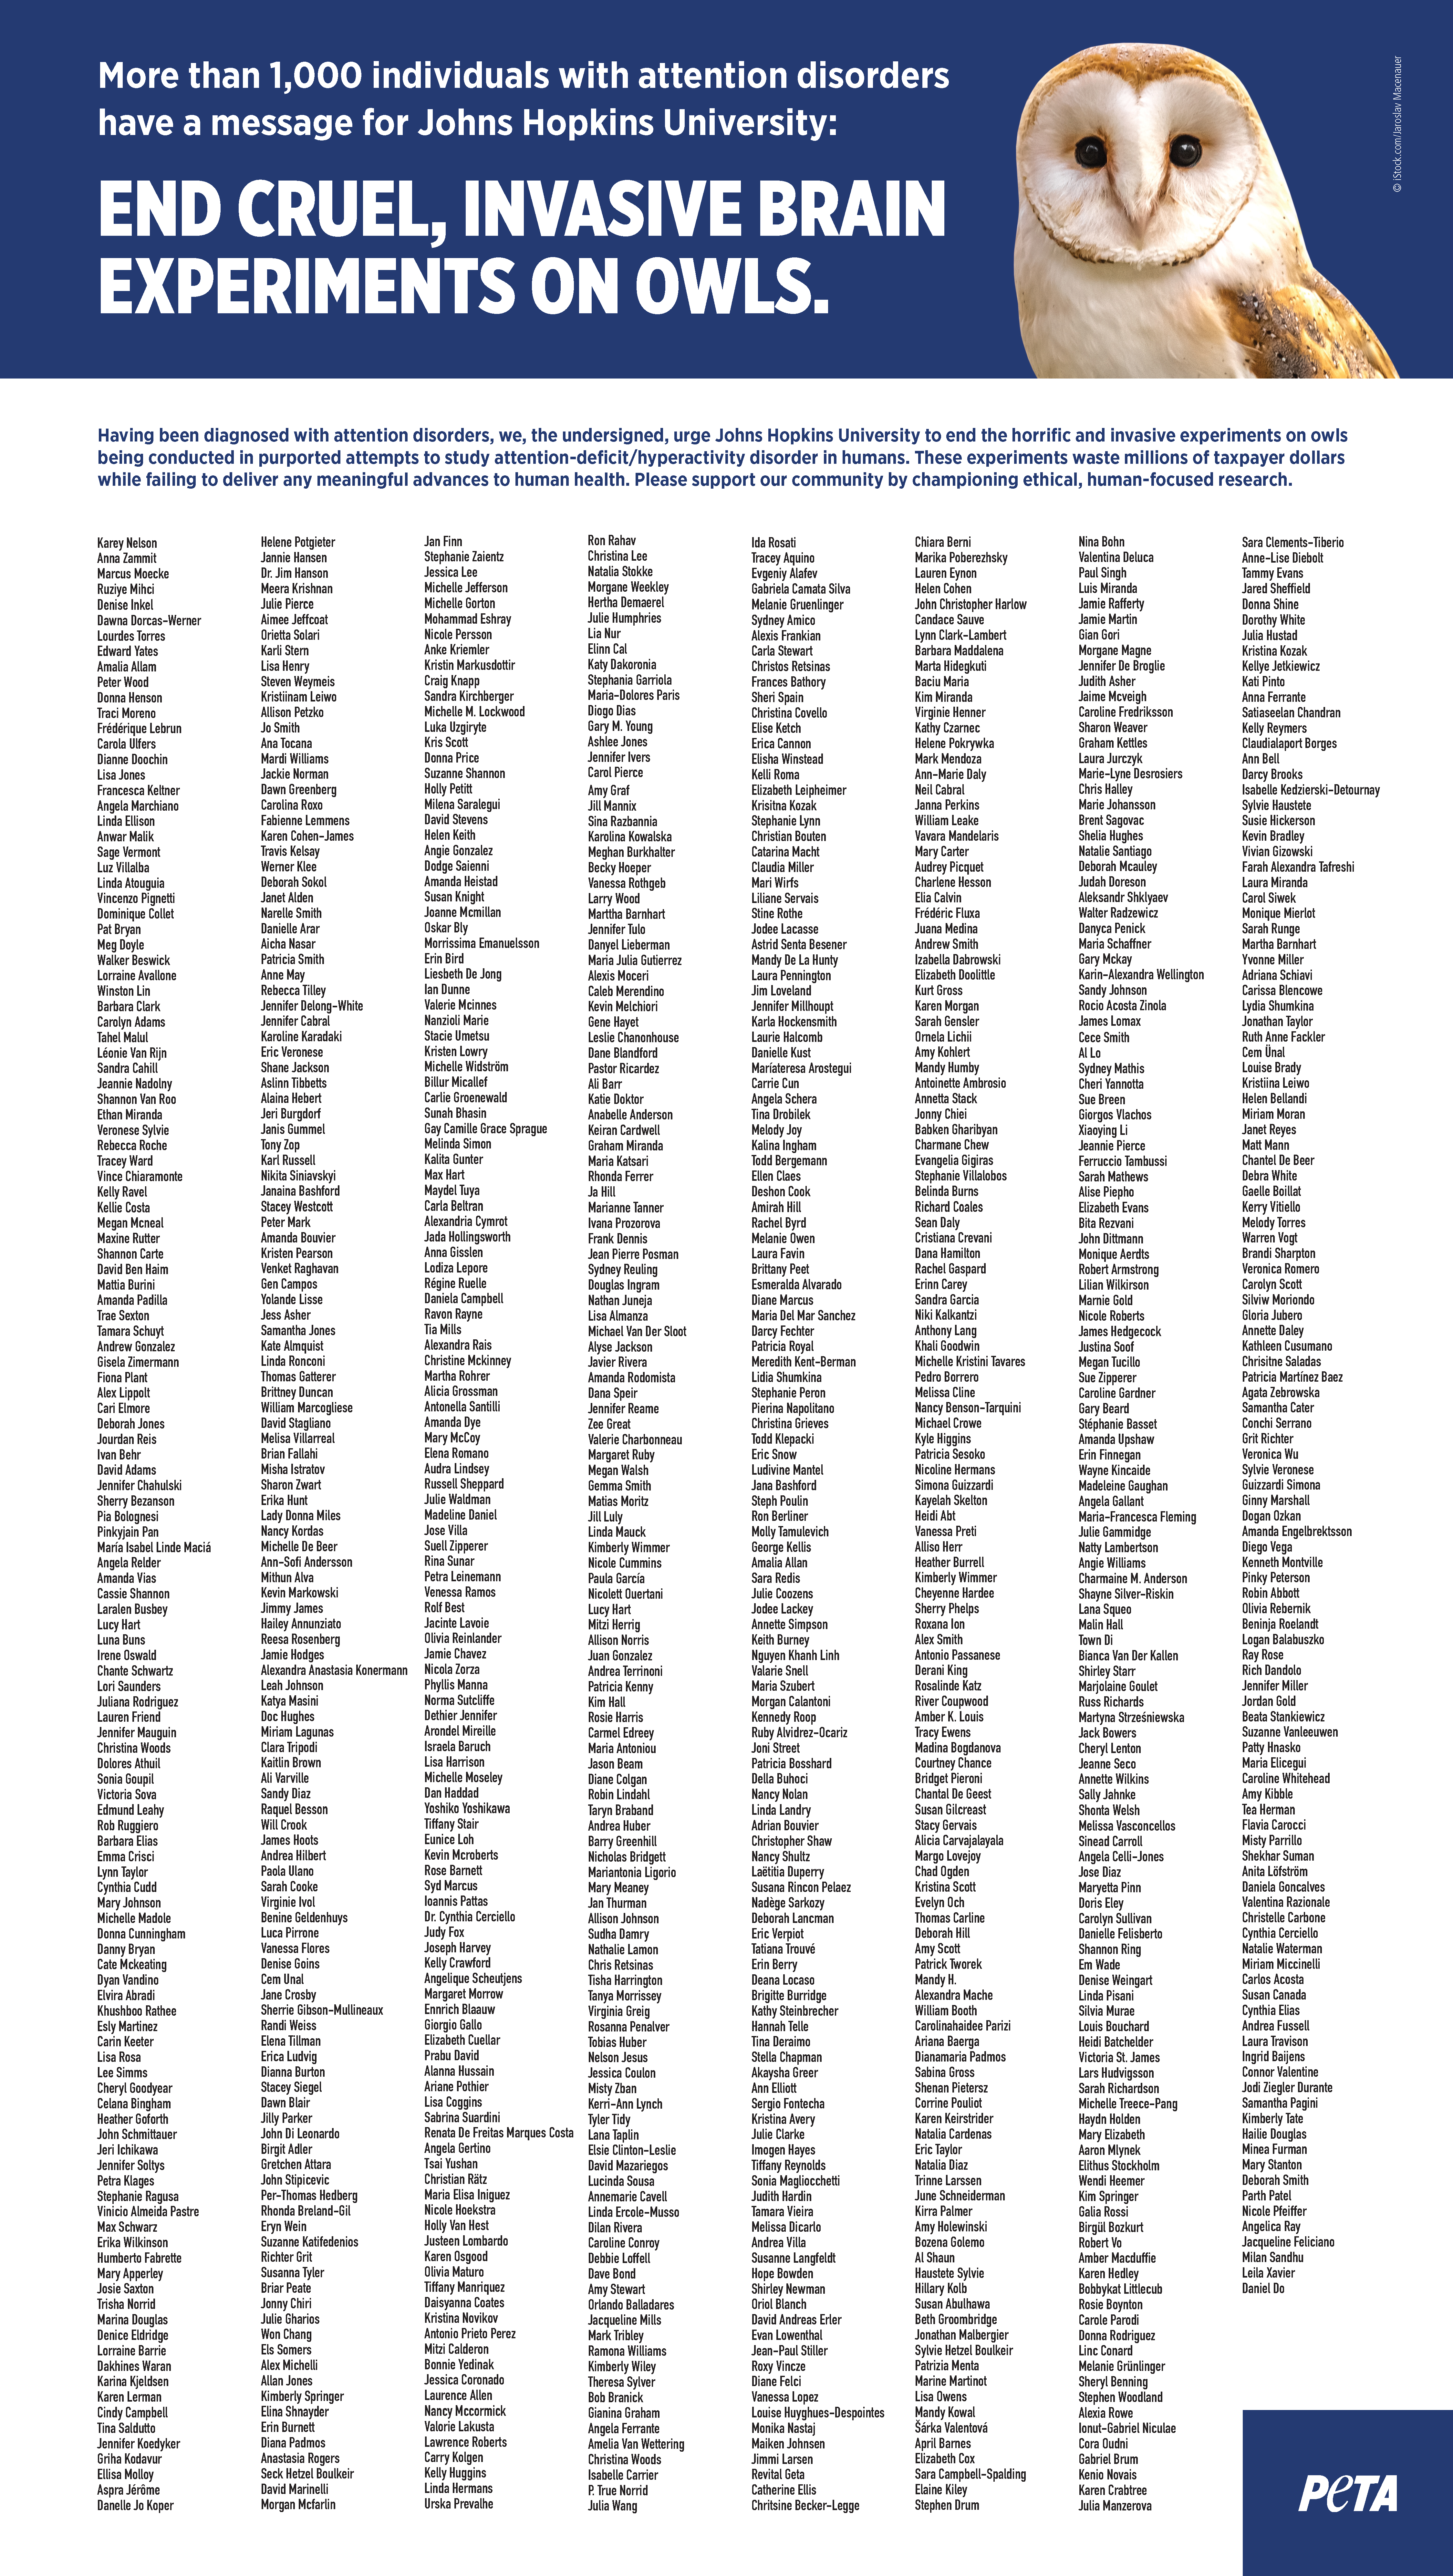 Full page ad with several names.